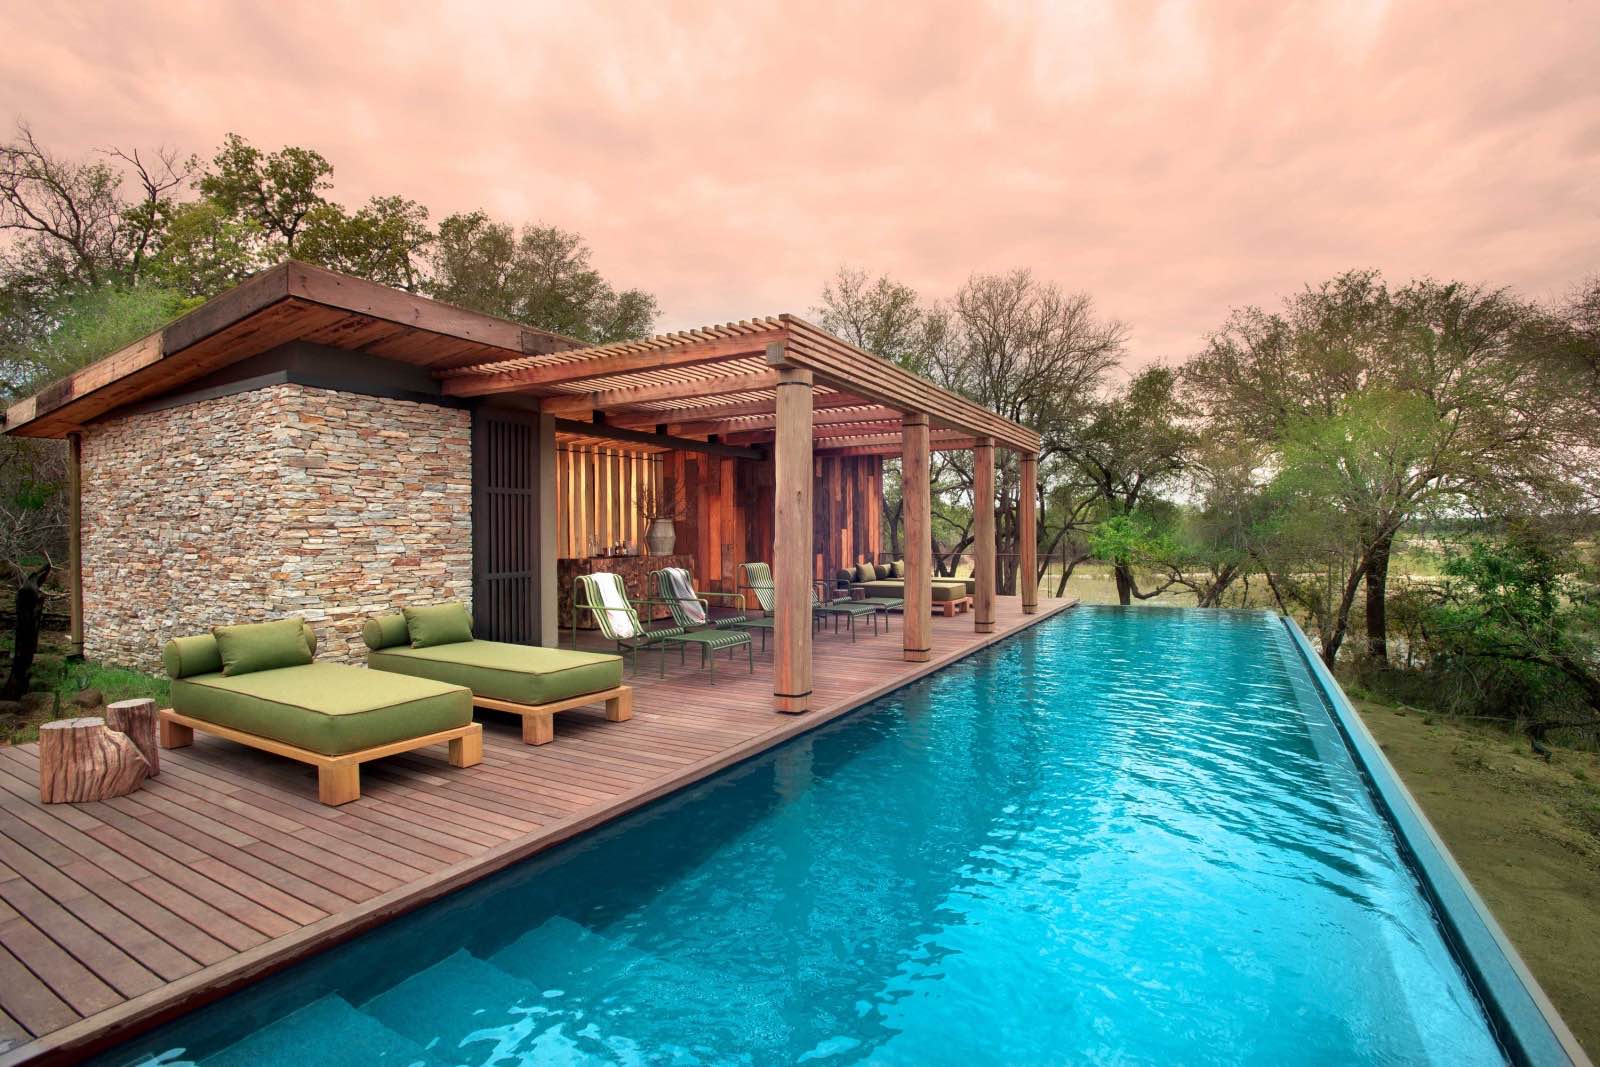 A long lap pool and plenty of space to relax and lounge alongside it